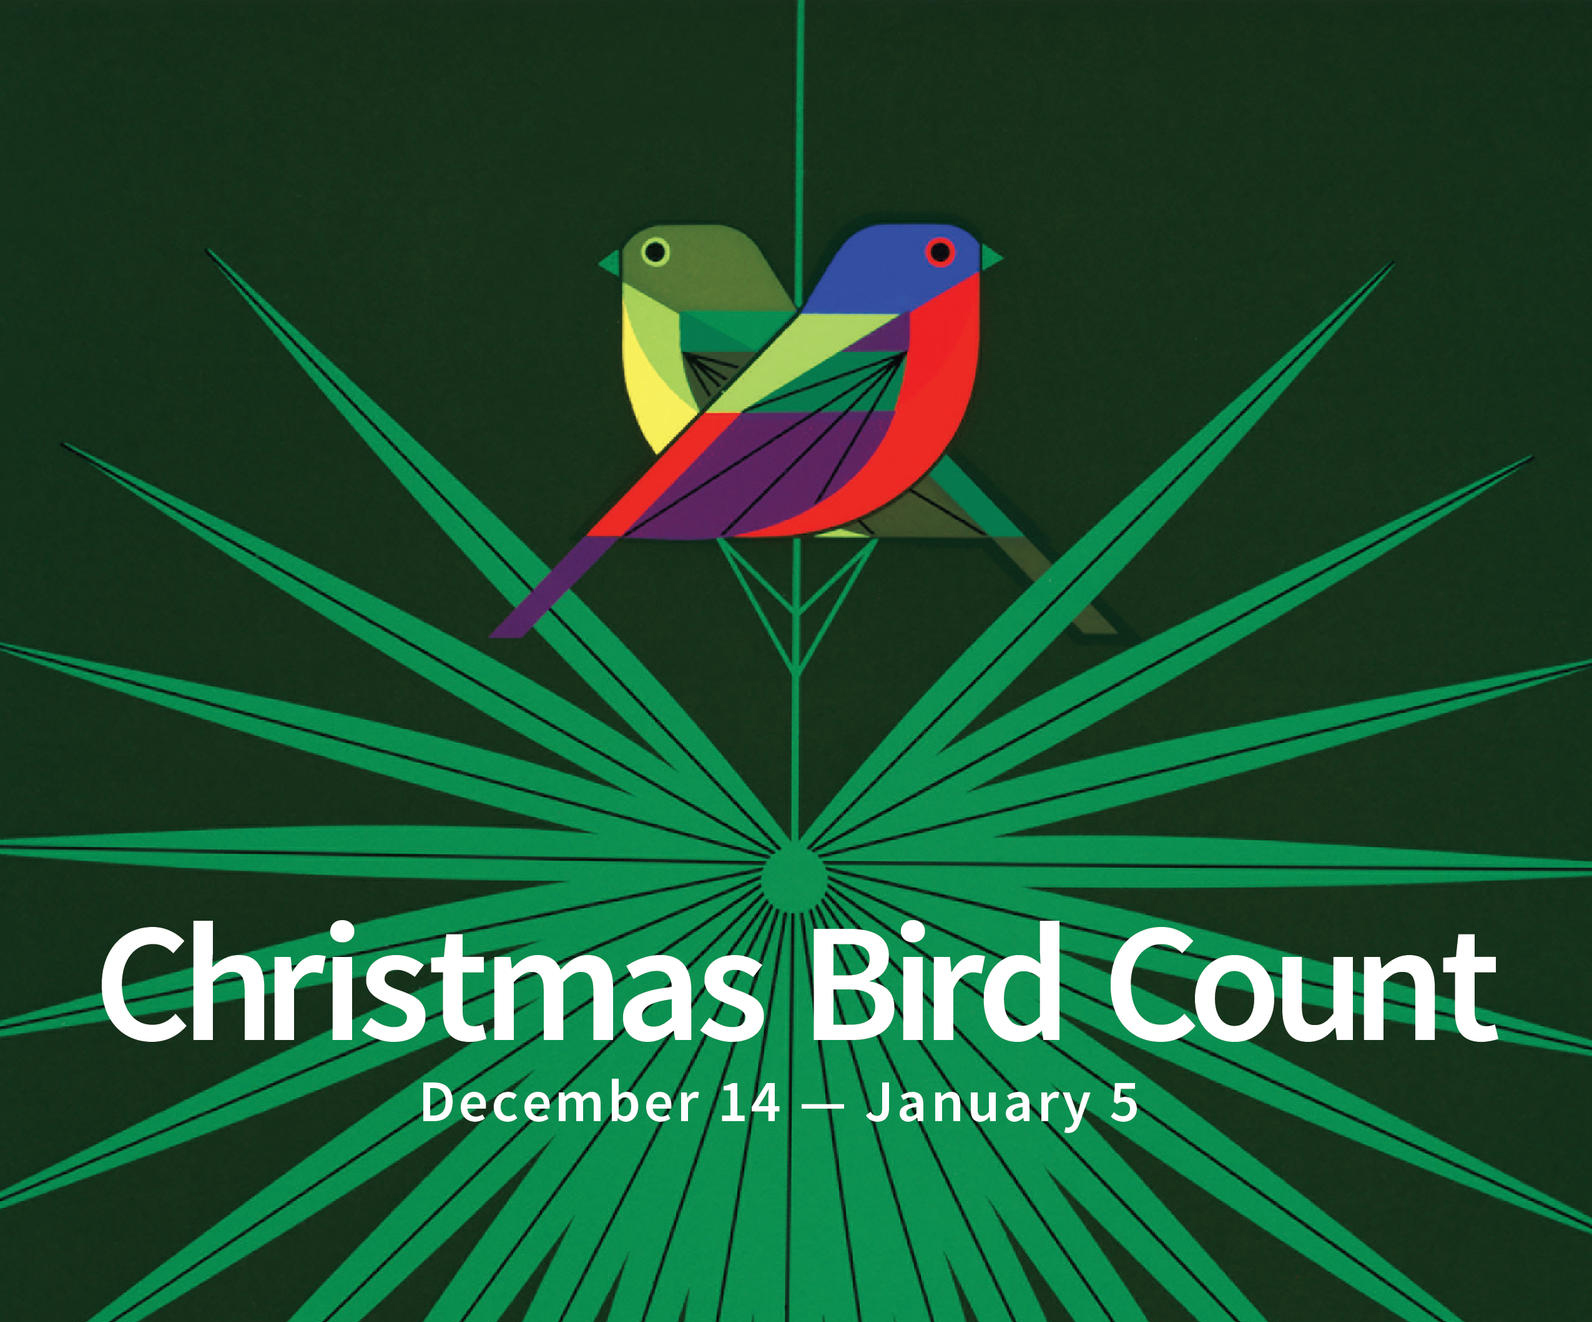 Graphic of painted buntings and a palm frond promoting Christmas Bird Count